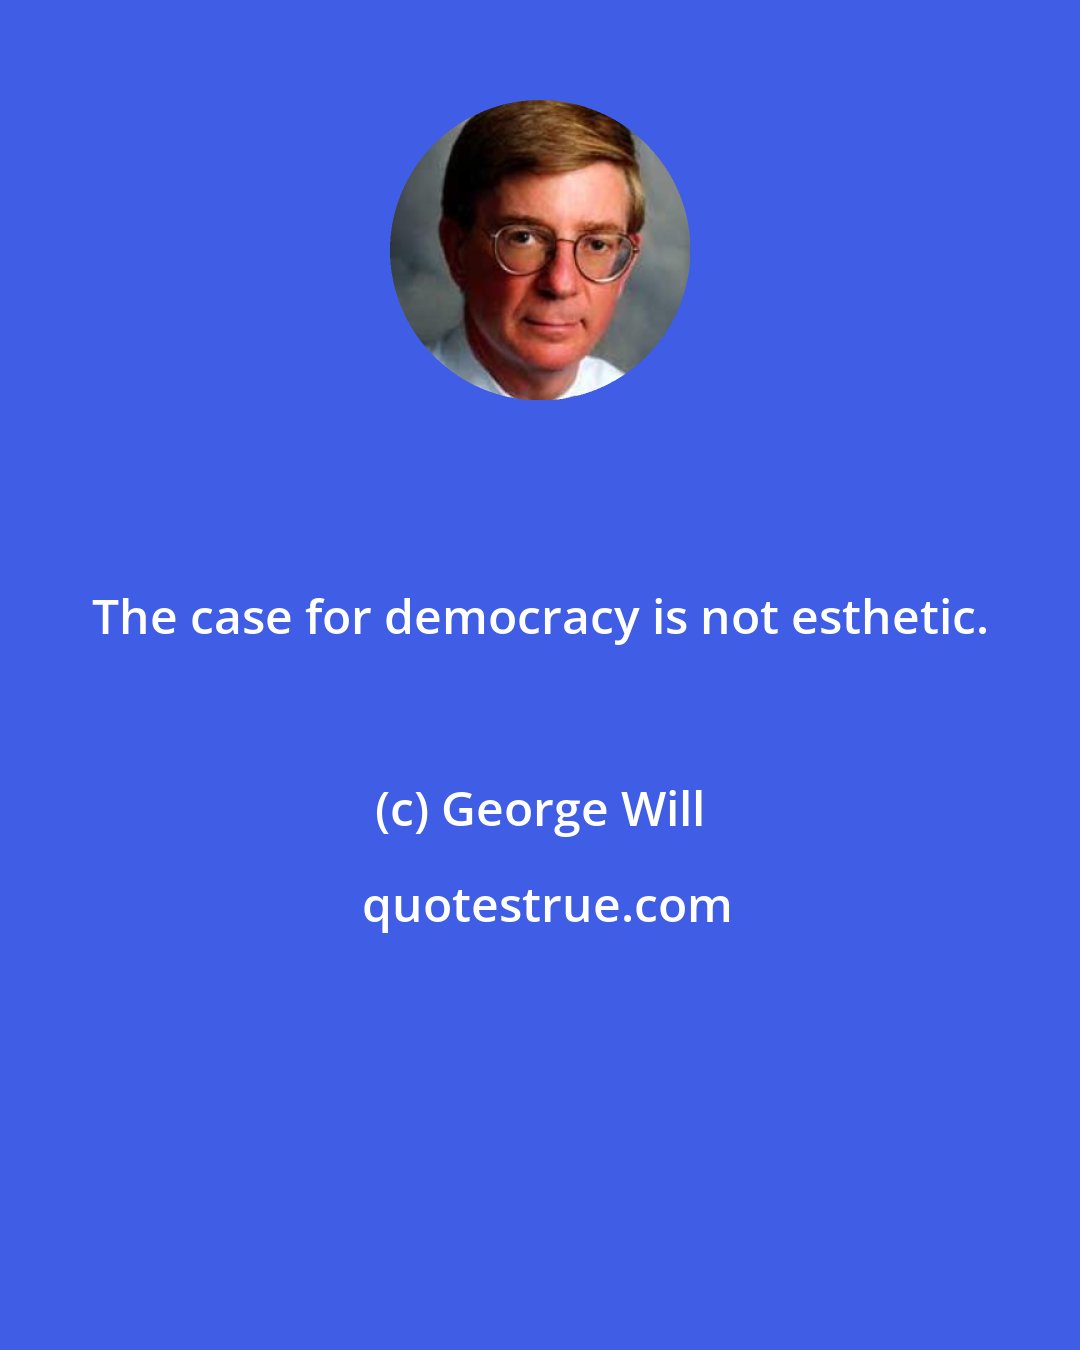 George Will: The case for democracy is not esthetic.